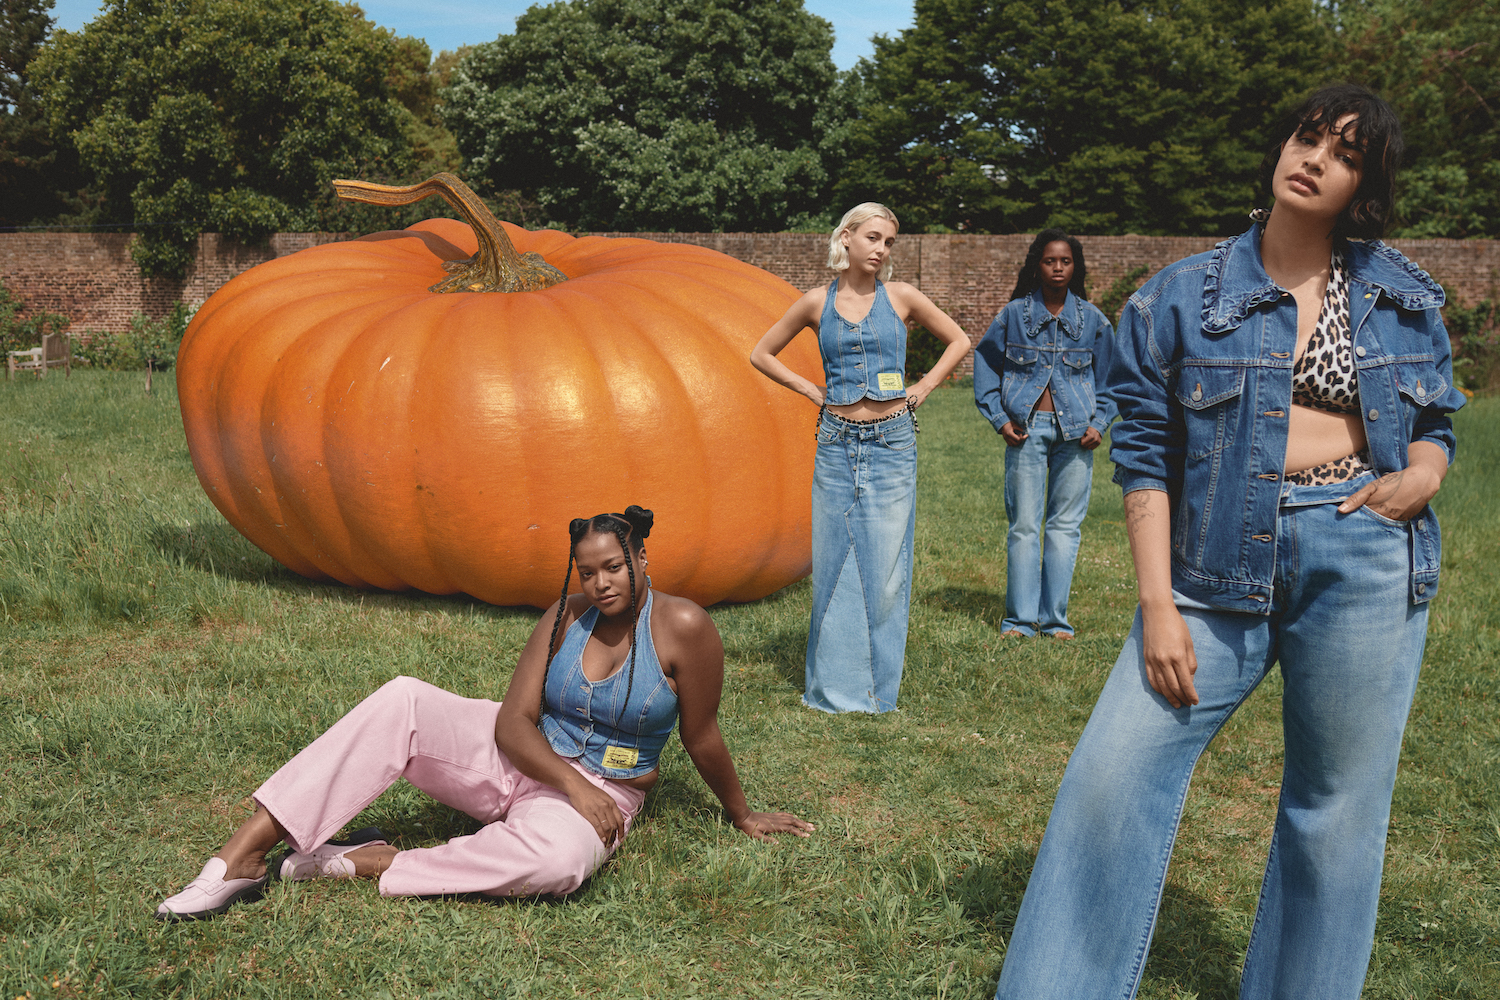 Emma Chamberlain and three other models are seen wearing denim next to a giant pumpkin